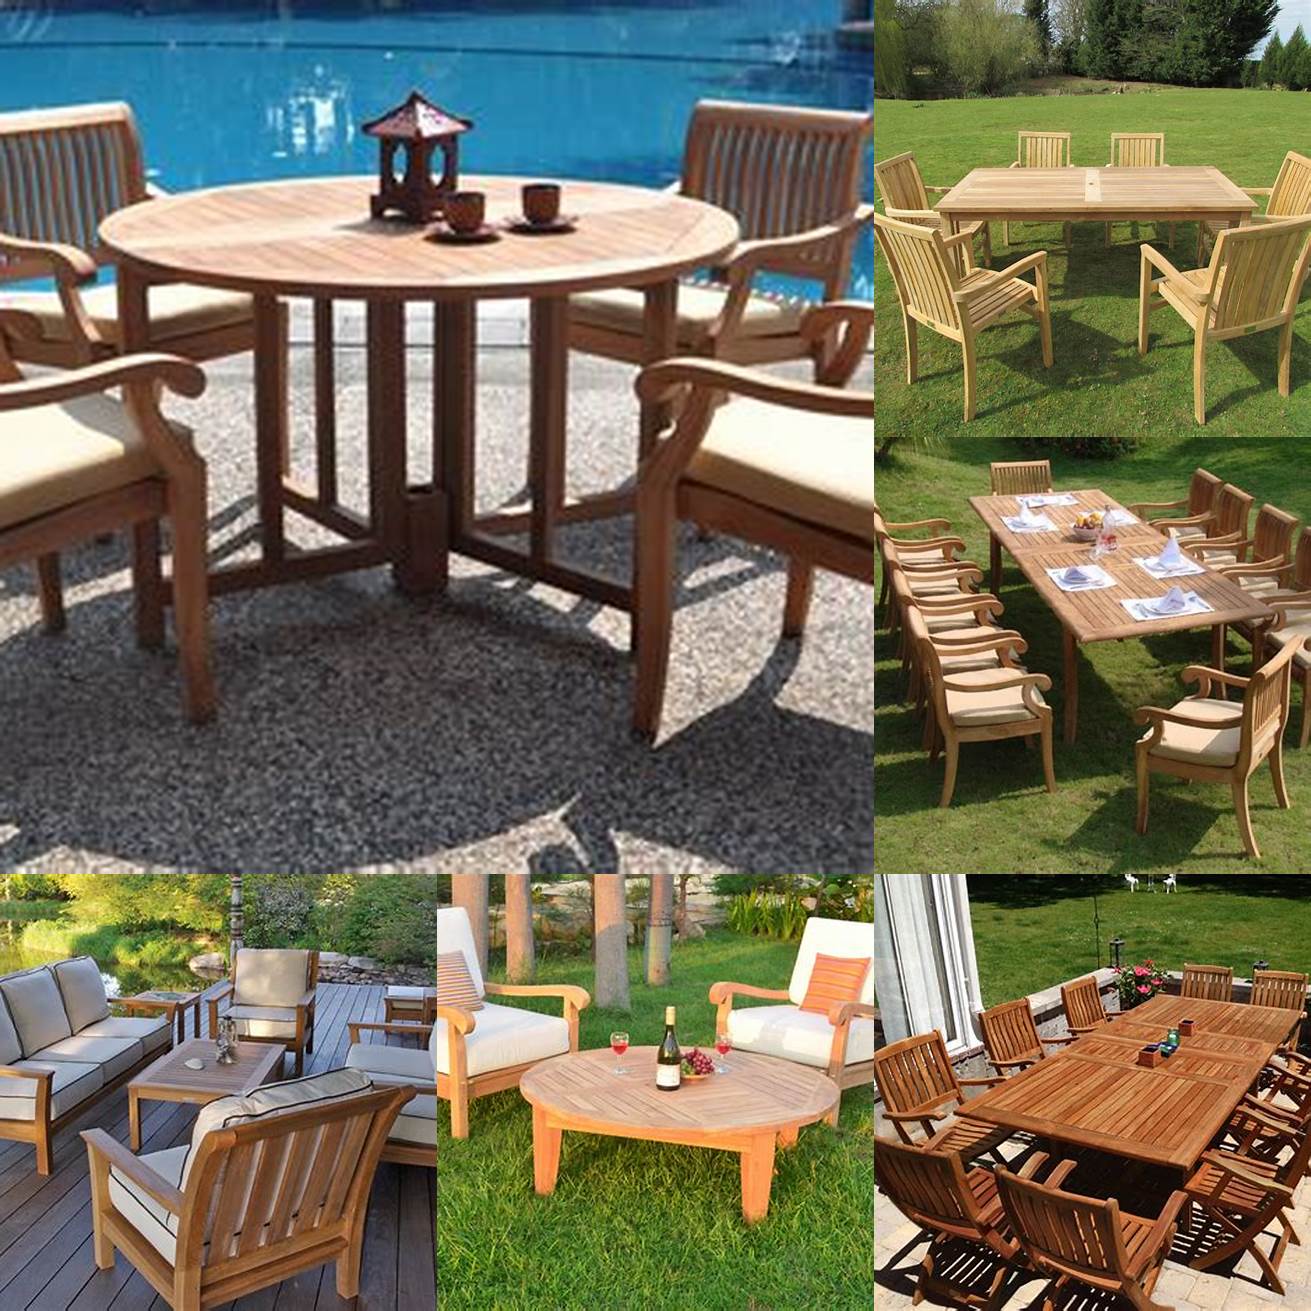 Choose the Right Type of Teak